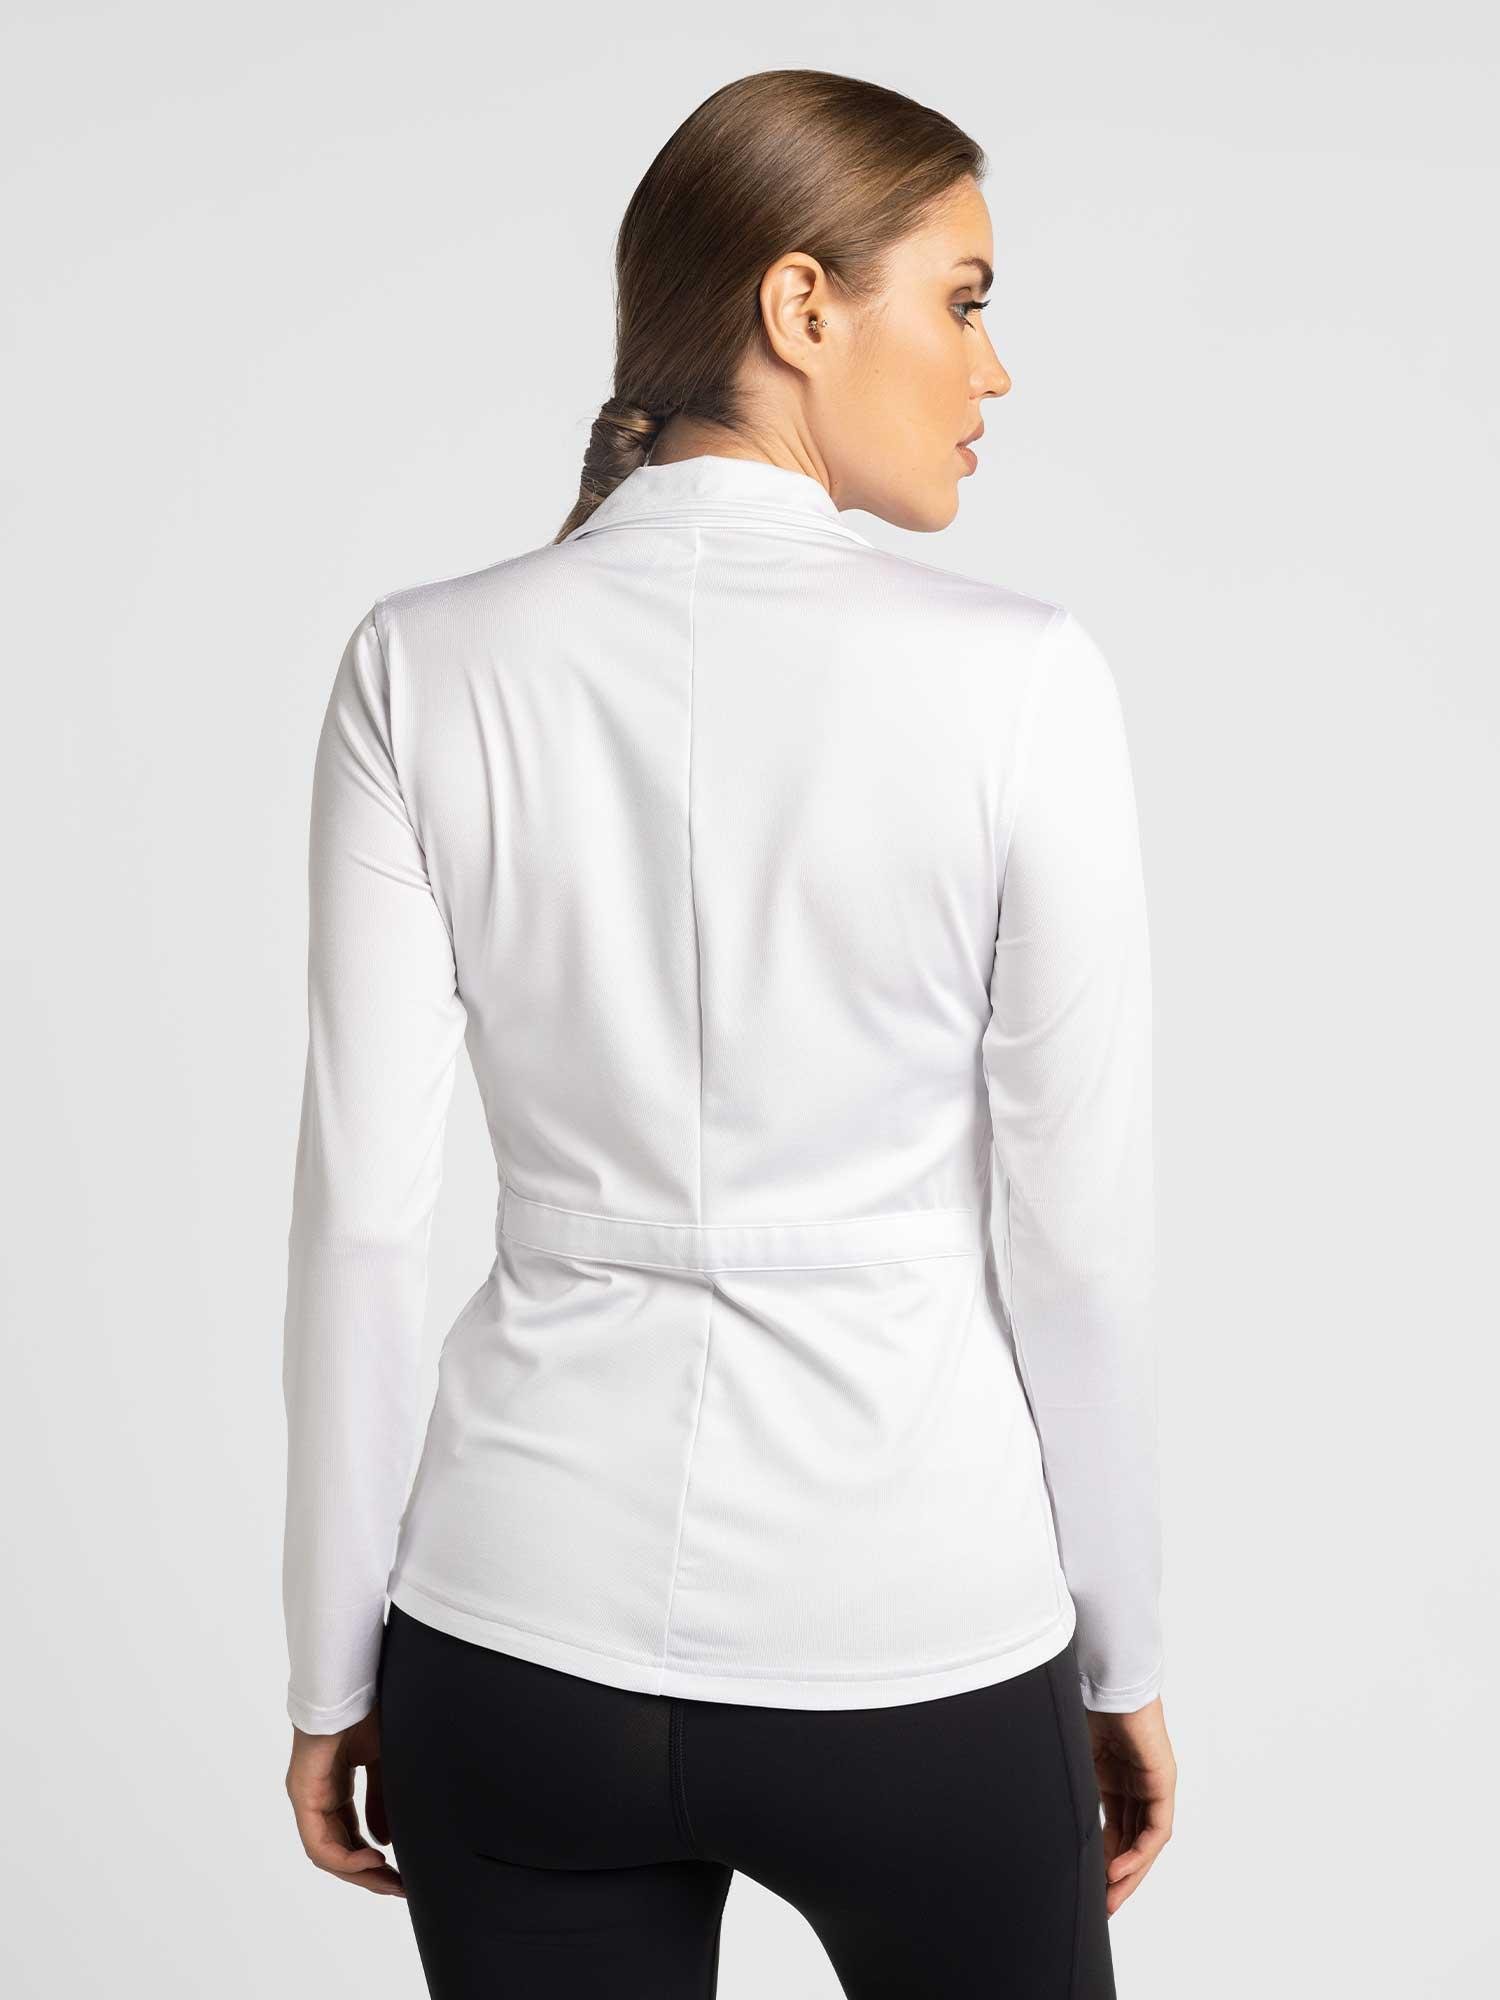 Classic Blythe Jacket - White by INPHORM